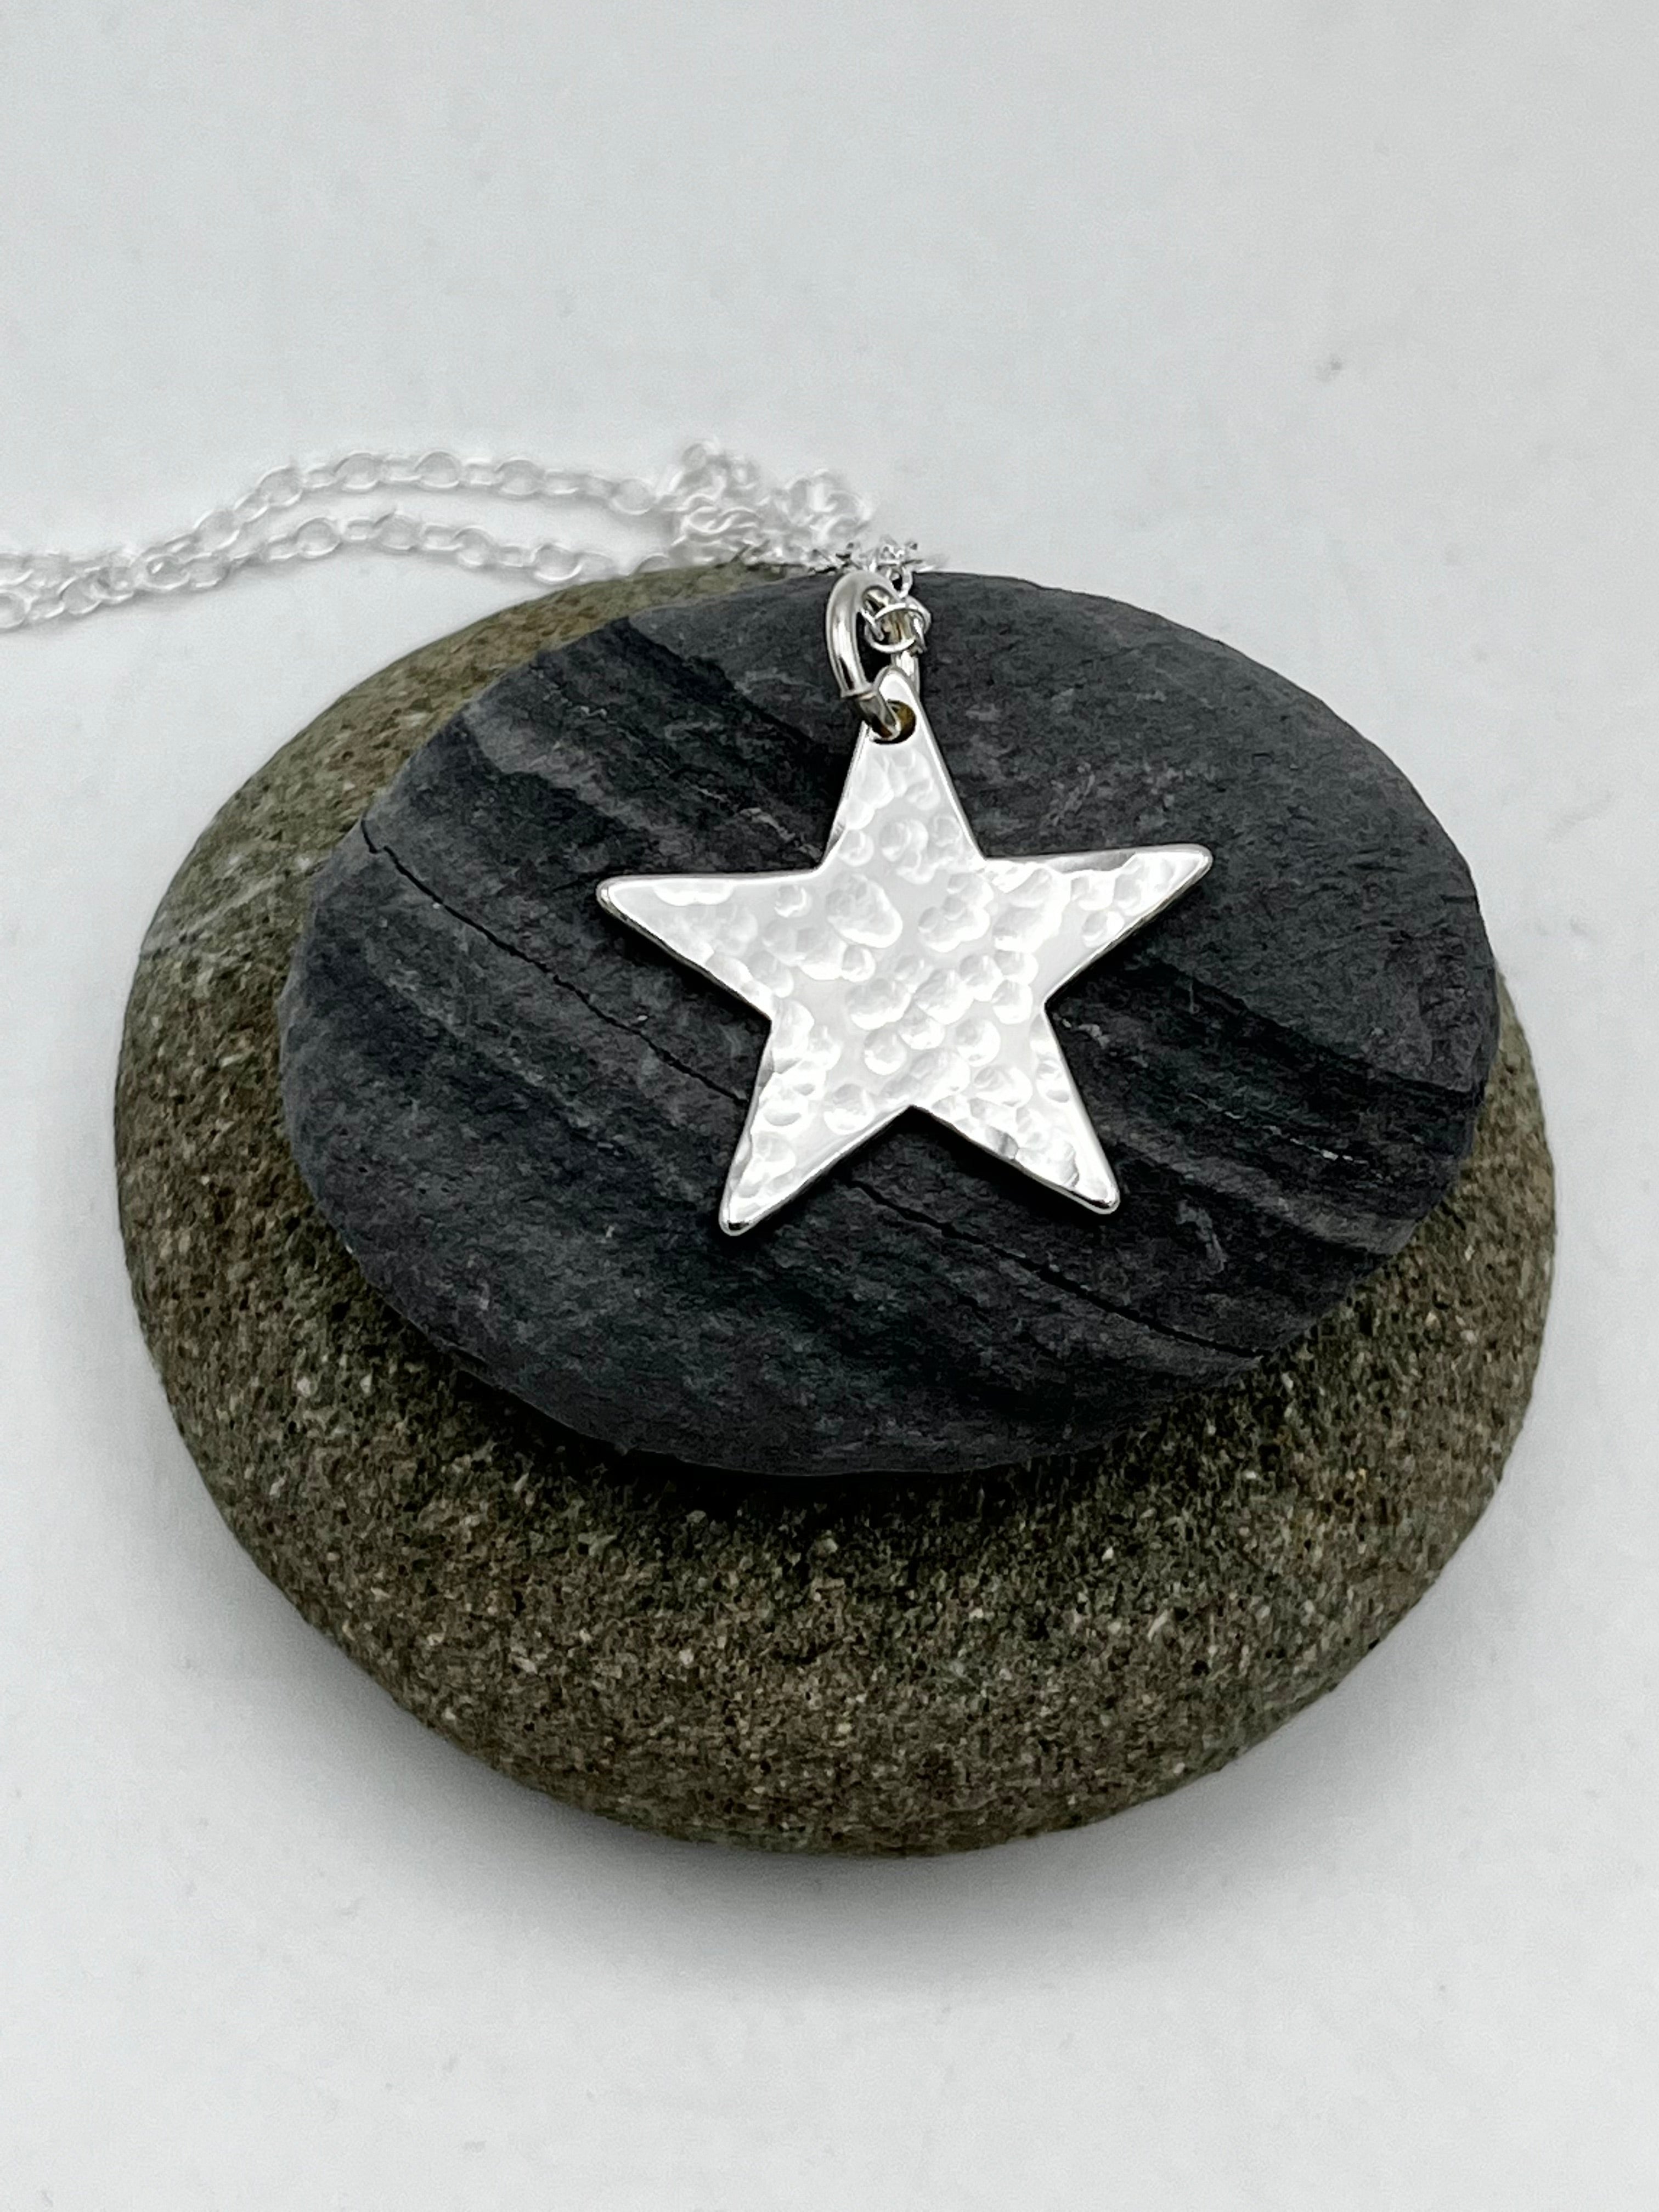 Single Star pendant 20mm wide hammered finish on 16" chain